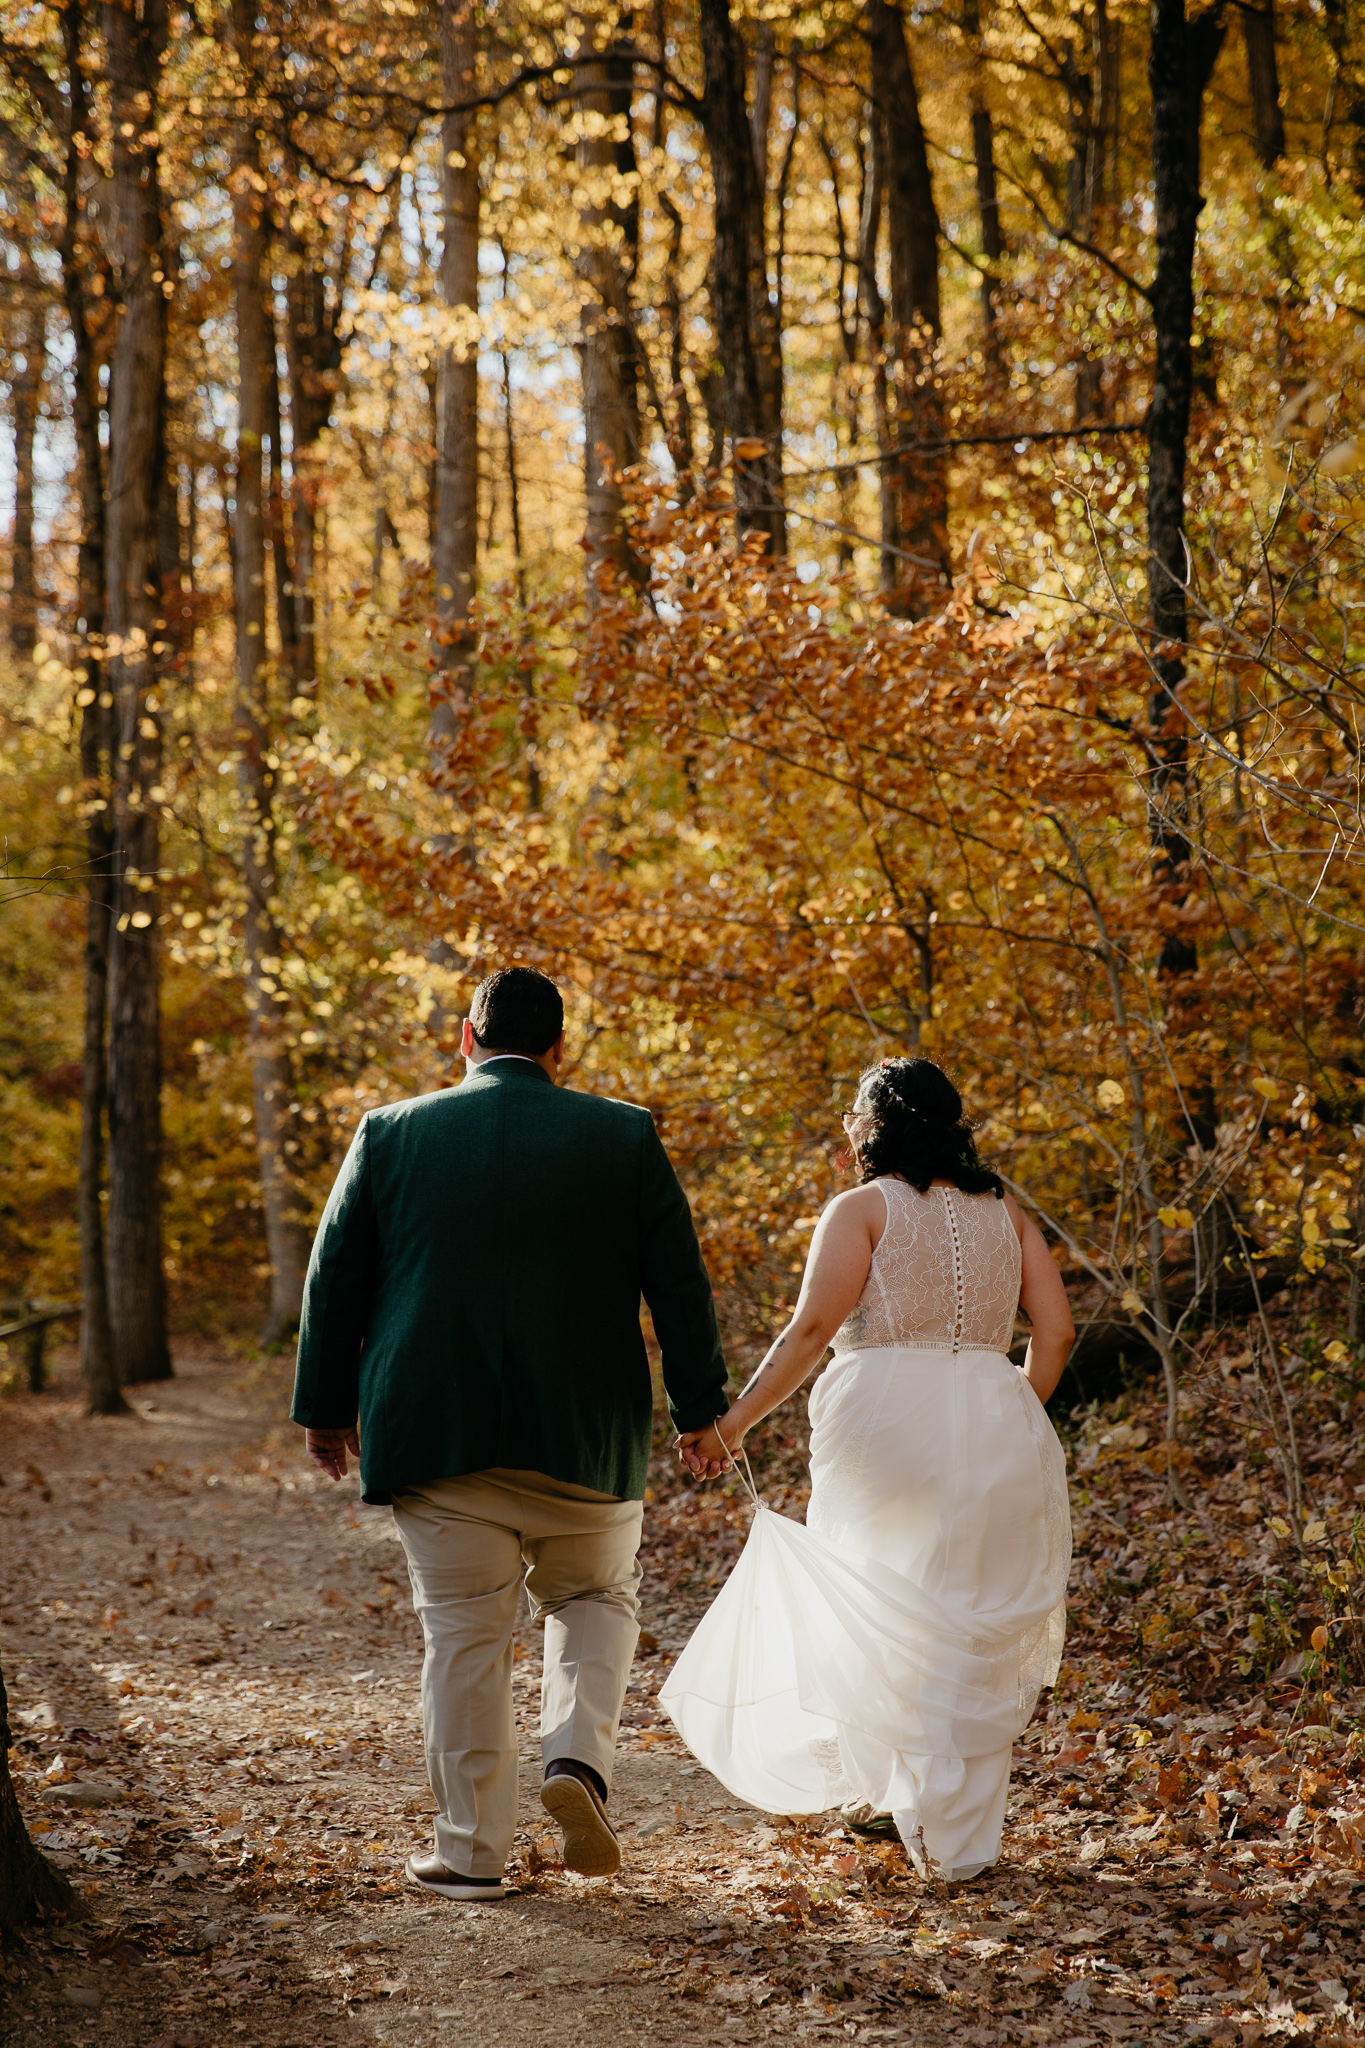 Bride and groom walking through the autumn woods at Turkey Run State Park, holding hands